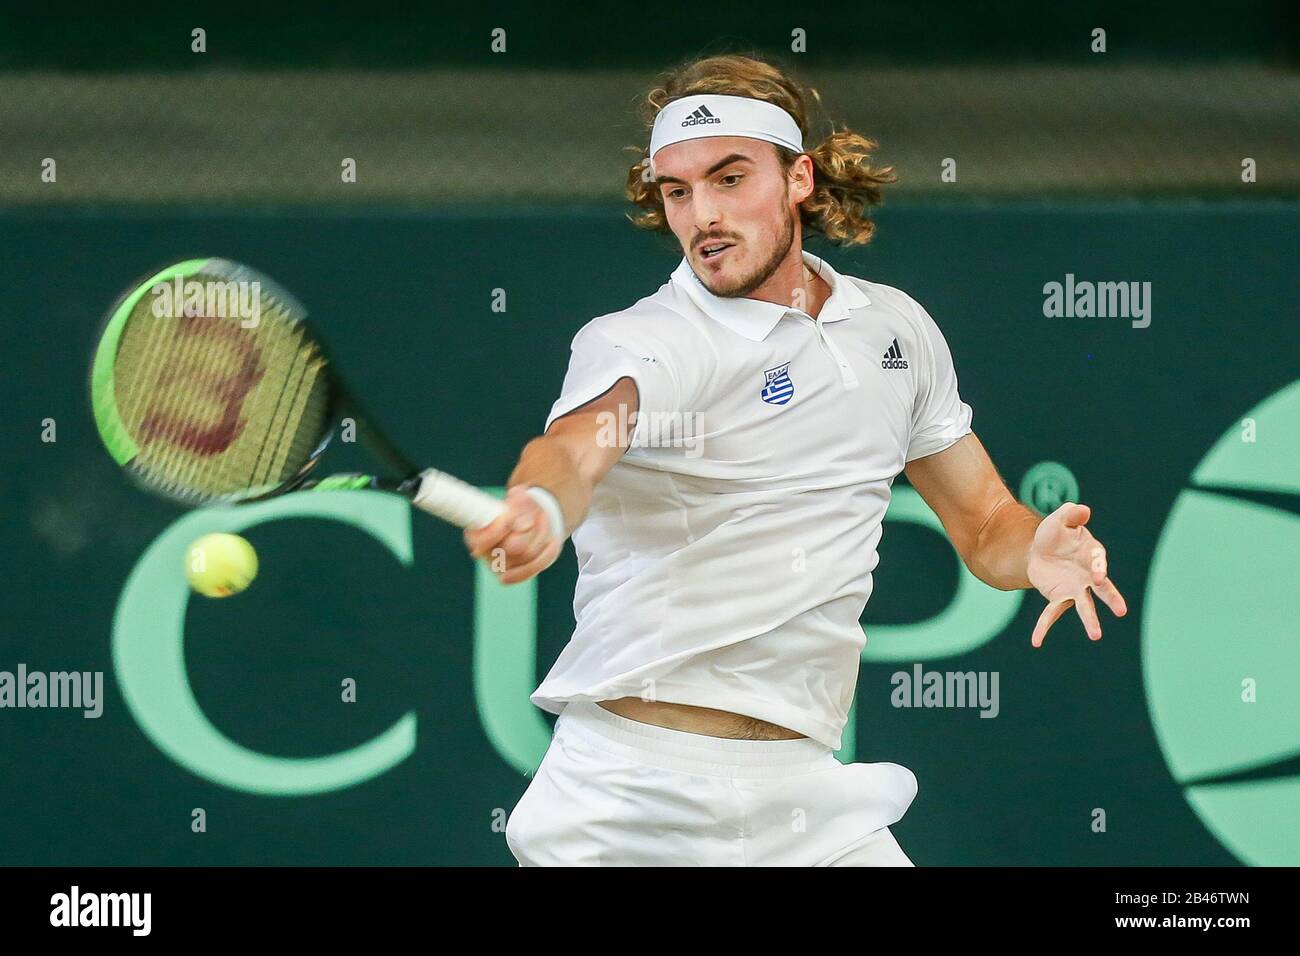 Manila. 6th Mar, 2020. Stefanos Tsitsipas of Greece returns the ball during the singles match against Alberto Lim of the Philippines at Davis Cup World Group II play-off round between the Philippines and Greece in Manila, the Philippines on March 6, 2020. Credit: Rouelle Umali/Xinhua/Alamy Live News Stock Photo